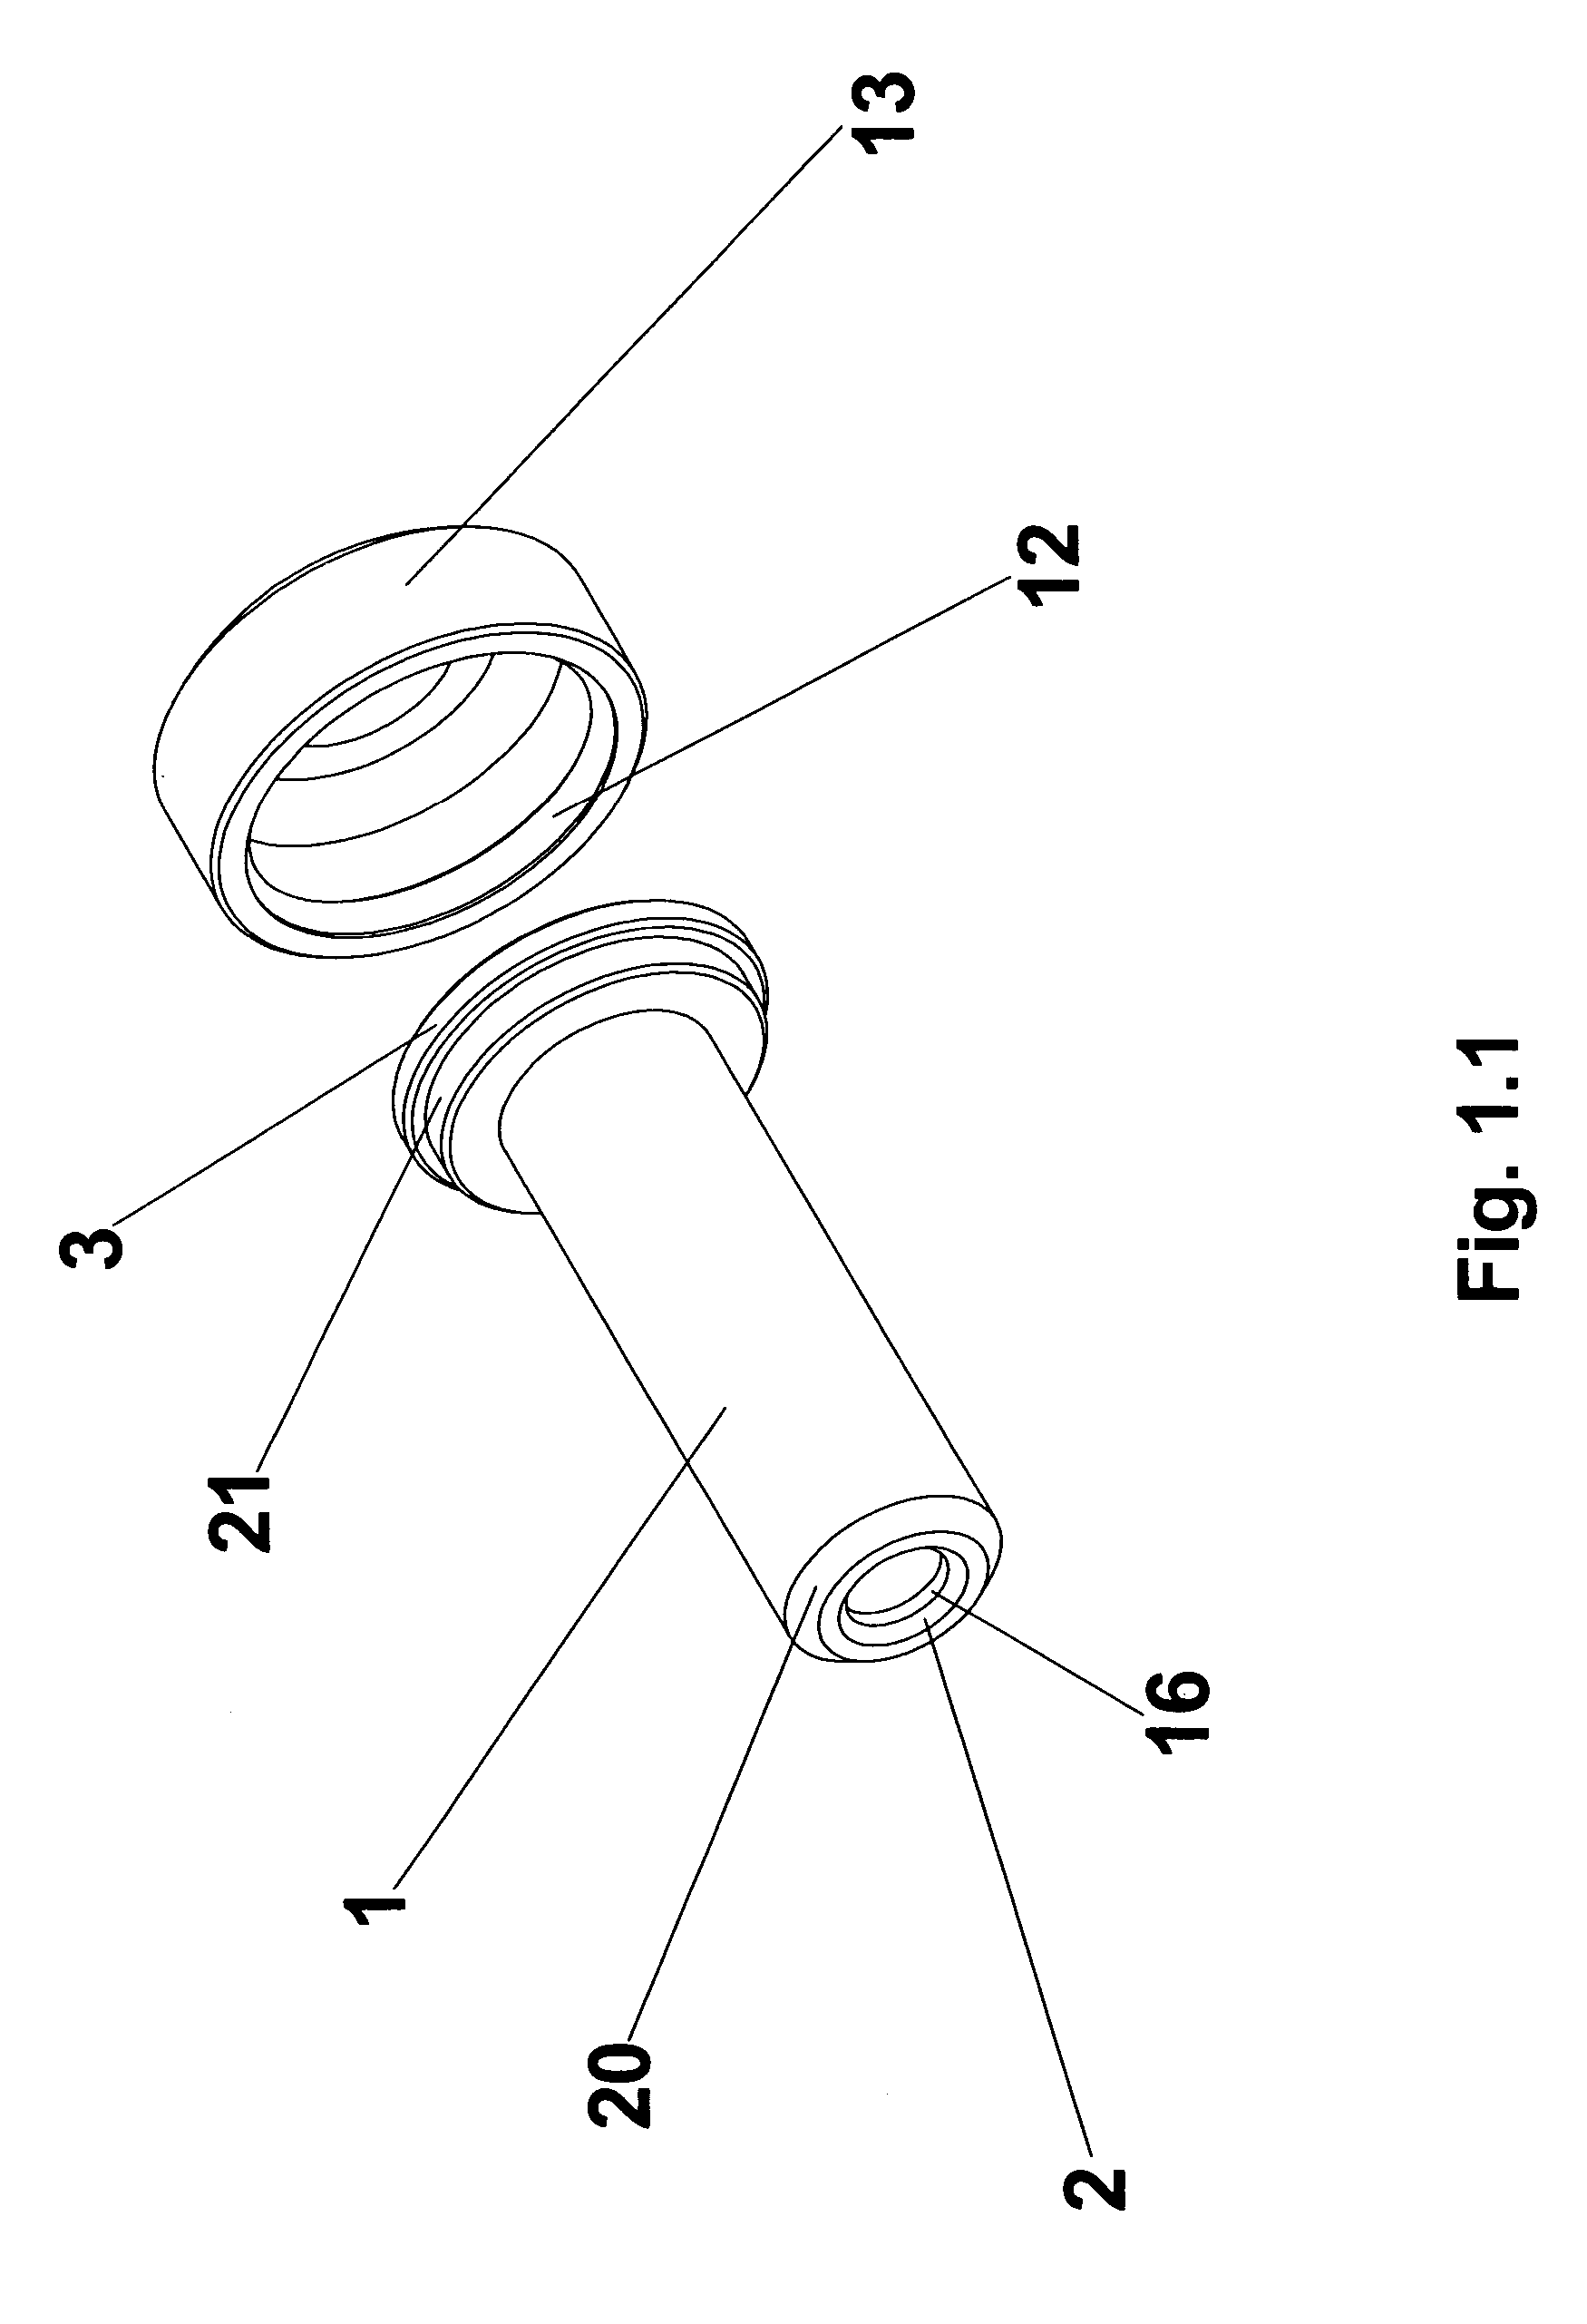 Spring loaded and self-locking cable gripping apparatus